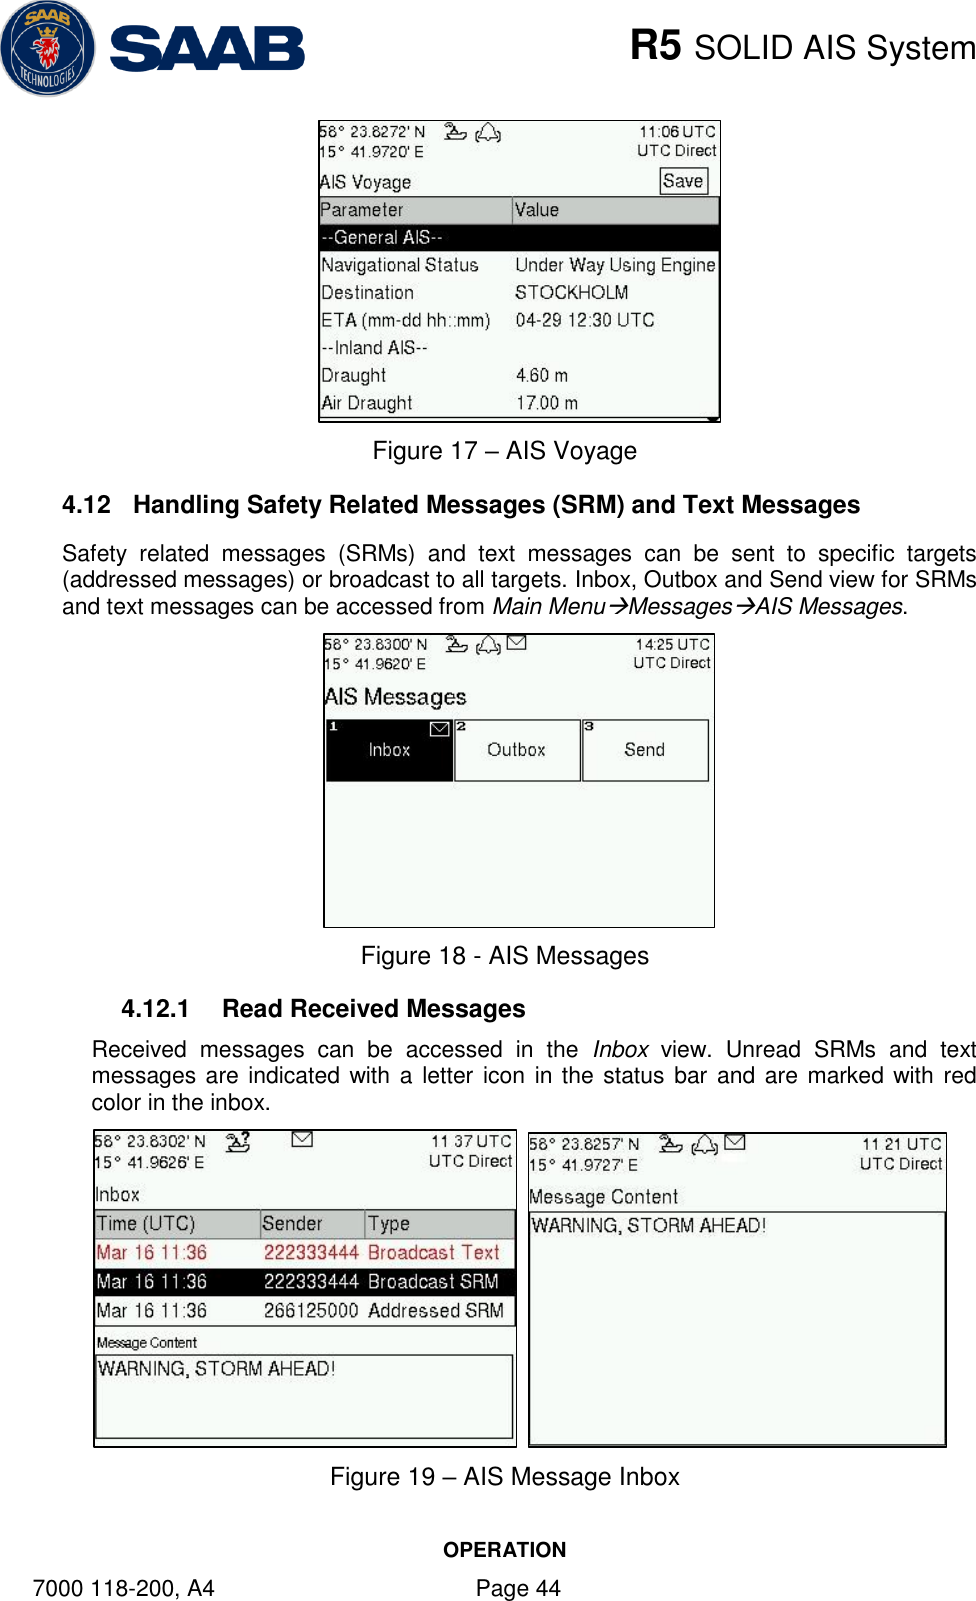    R5 SOLID AIS System OPERATION 7000 118-200, A4    Page 44  Figure 17 – AIS Voyage 4.12  Handling Safety Related Messages (SRM) and Text Messages Safety  related  messages  (SRMs)  and  text  messages  can  be  sent  to  specific  targets (addressed messages) or broadcast to all targets. Inbox, Outbox and Send view for SRMs and text messages can be accessed from Main MenuMessagesAIS Messages.   Figure 18 - AIS Messages 4.12.1  Read Received Messages Received  messages  can  be  accessed  in  the  Inbox  view.  Unread  SRMs  and  text messages are indicated with a letter icon in the status bar and are marked with red color in the inbox.    Figure 19 – AIS Message Inbox 